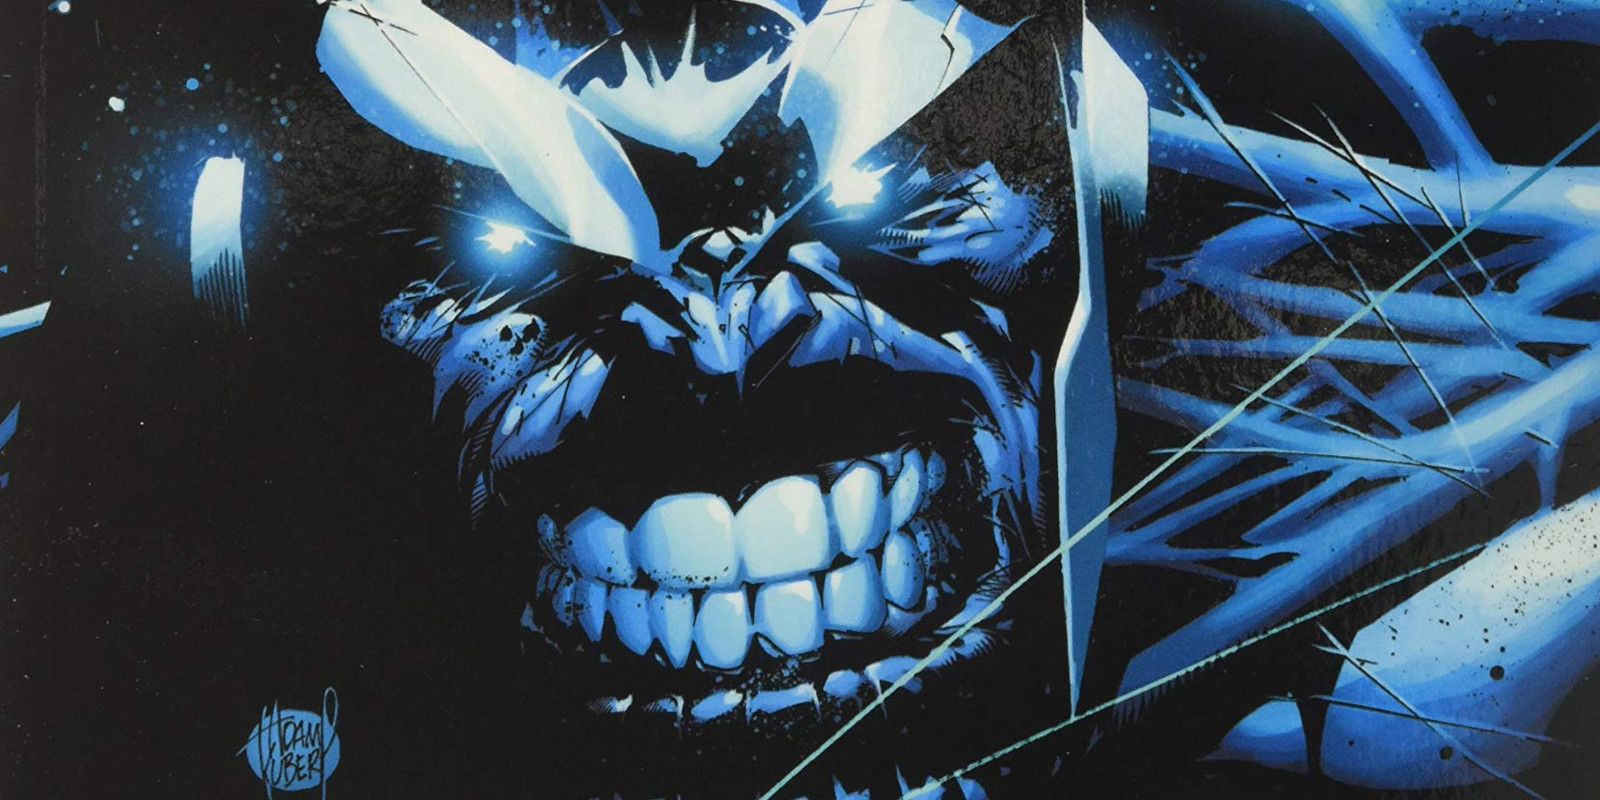 Thanos in the Avengers Infinity comic grinning evily.